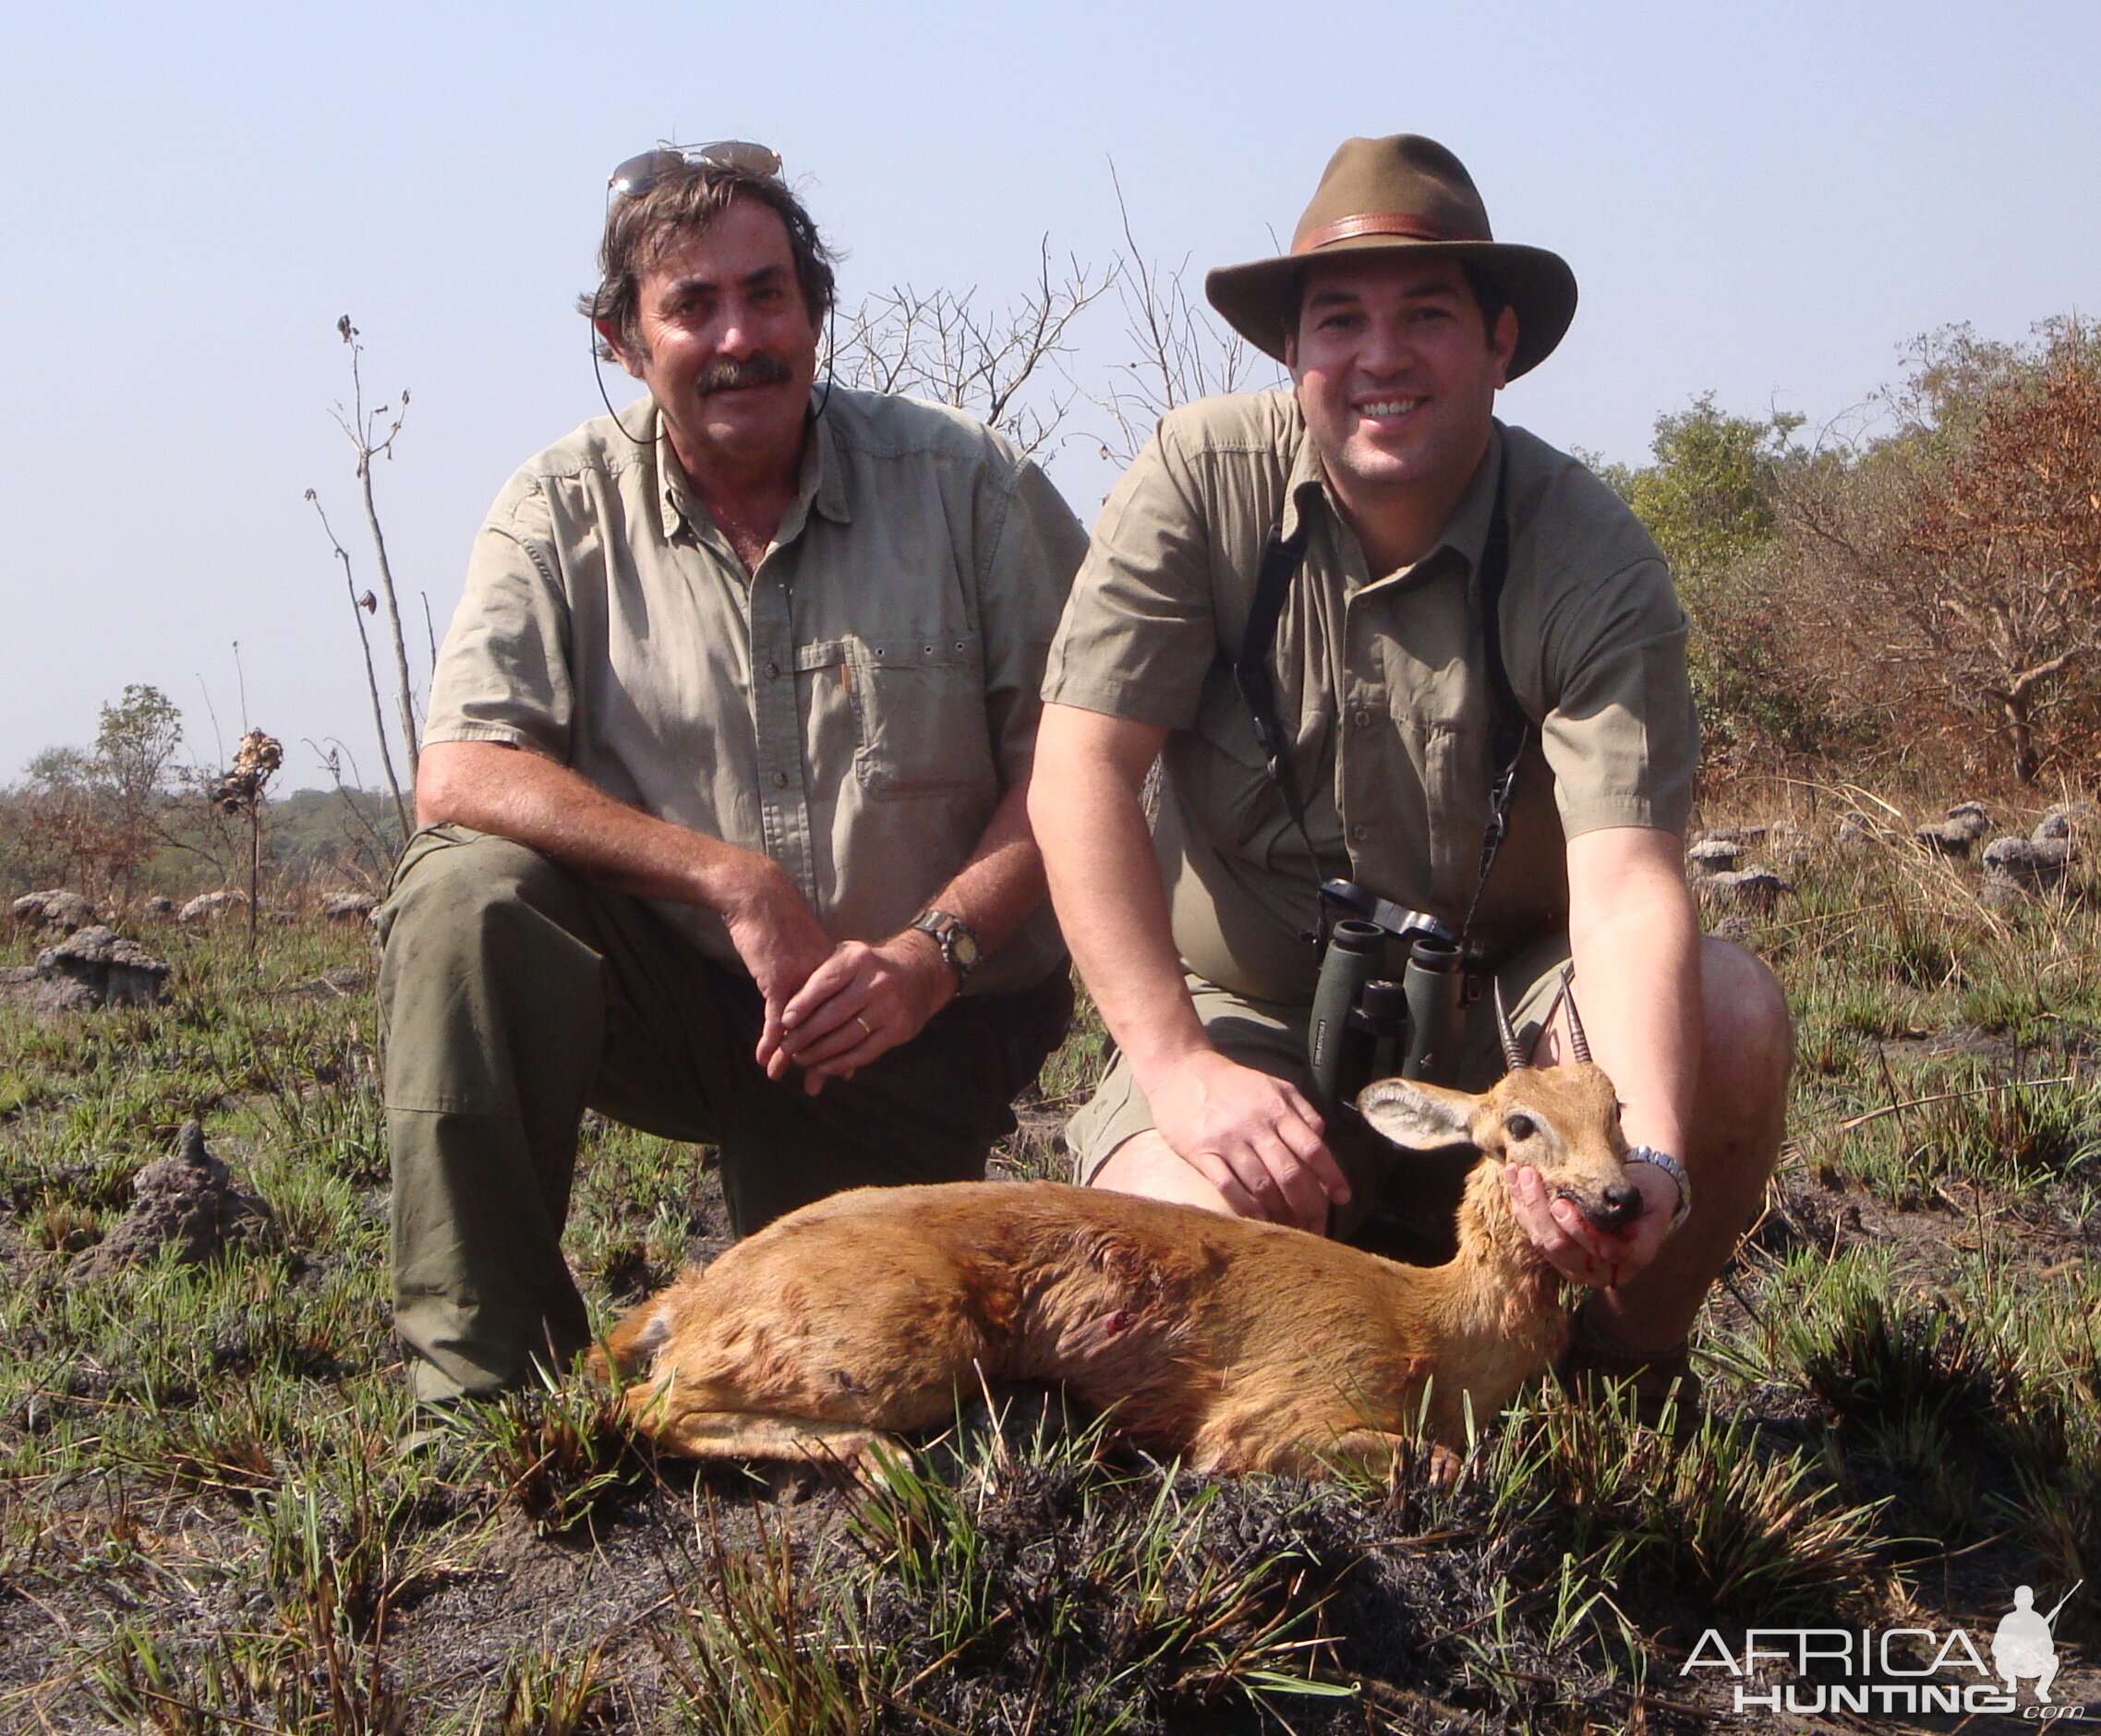 Oribi hunted in Central Africa with Club Faune